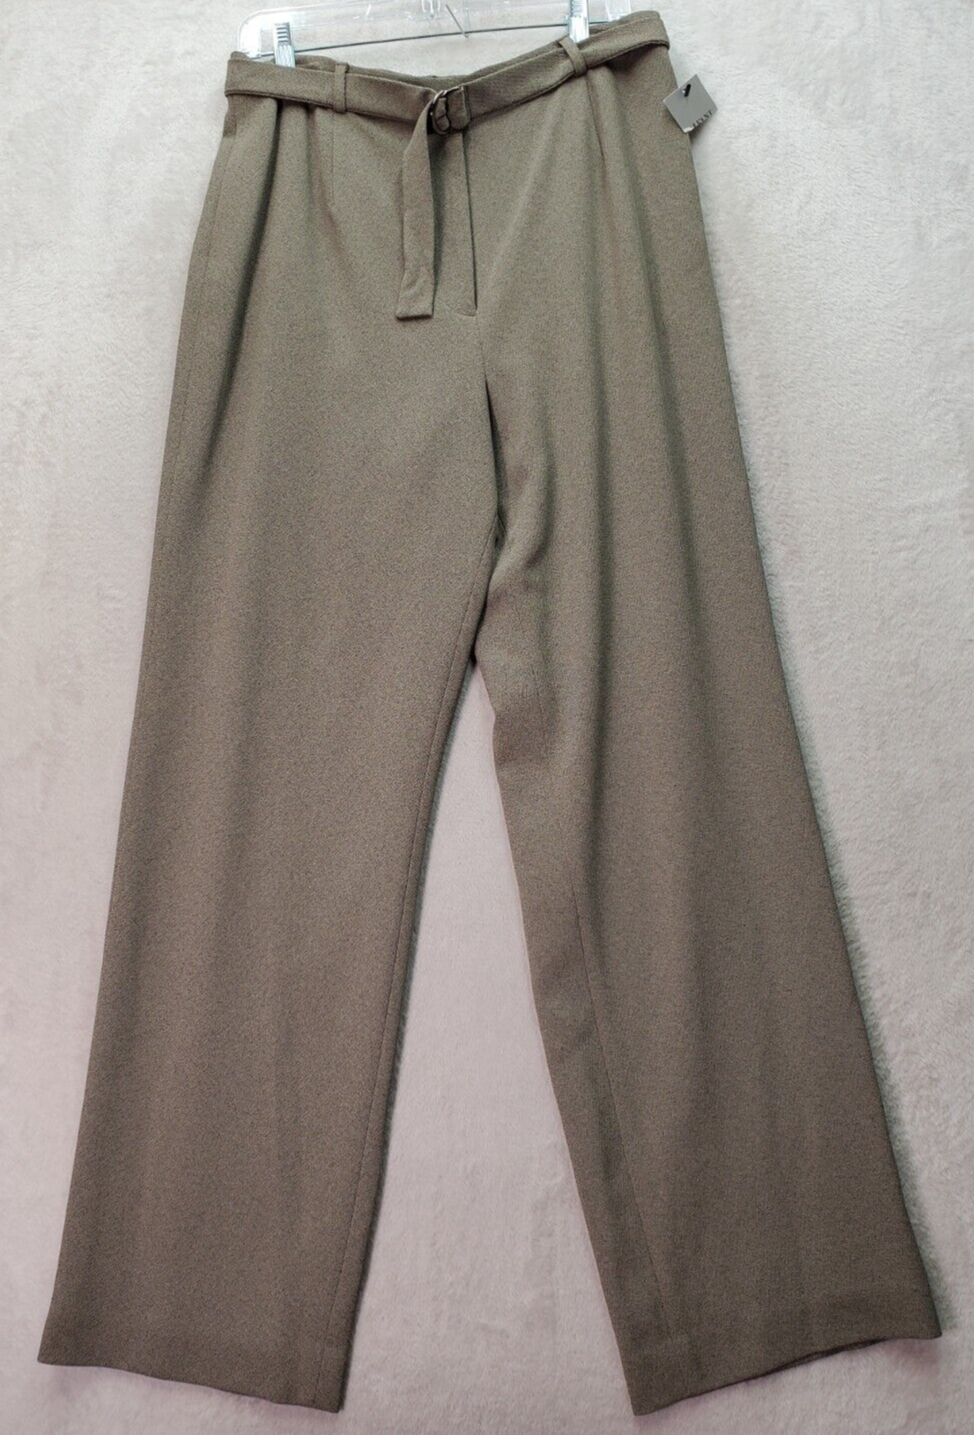 Primary image for Alfani Dress Pants Women Sz 14 Taupe Acetate Lined Belted Straight Leg High Rise